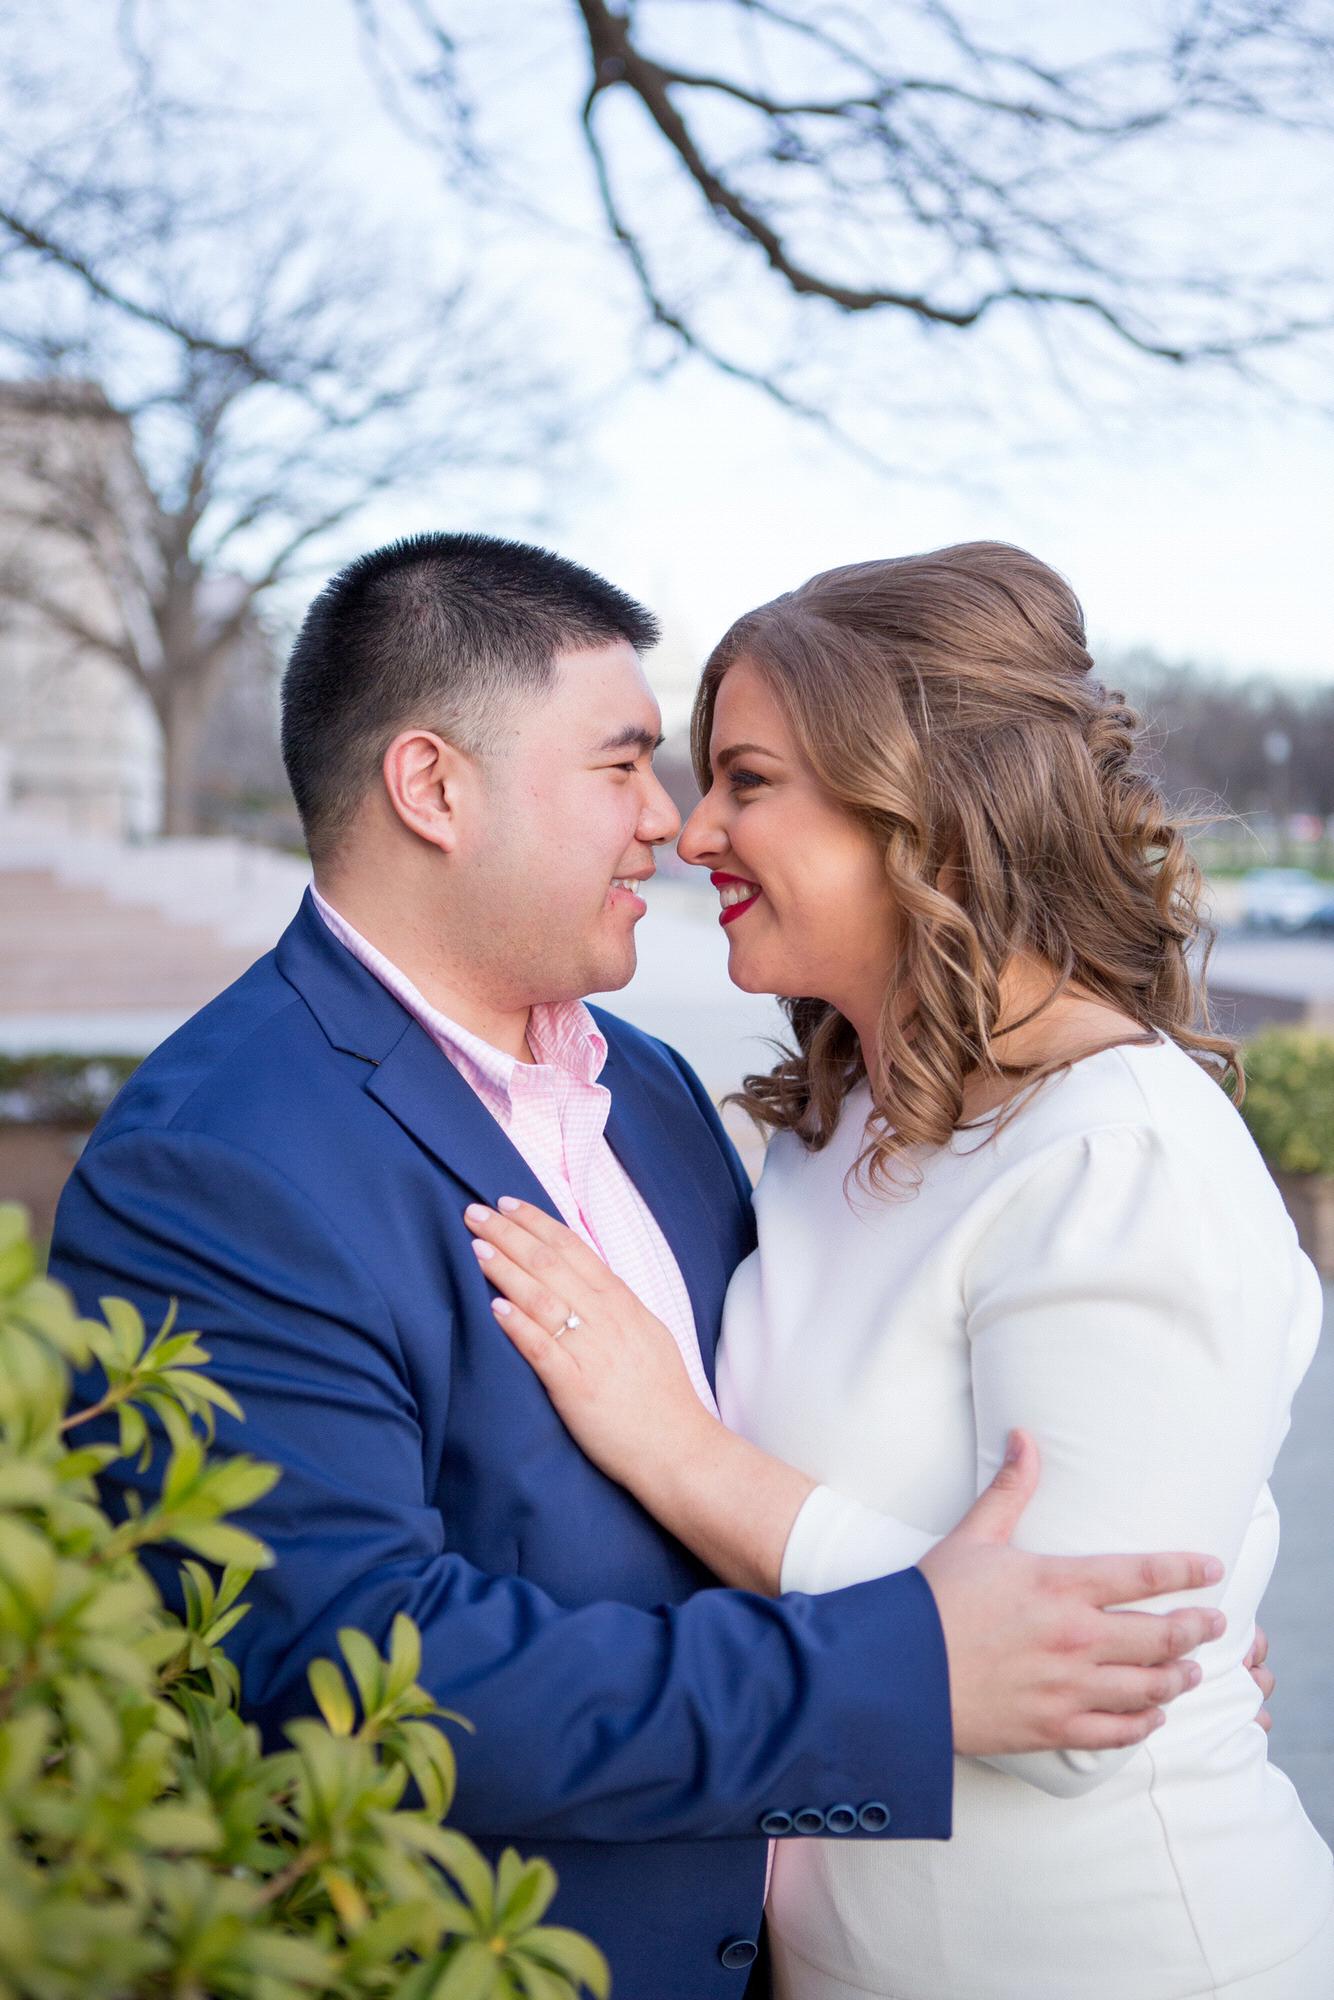 Engagement pictures at the National Gallery of Art, February 2020. (Kate Grace Photography)